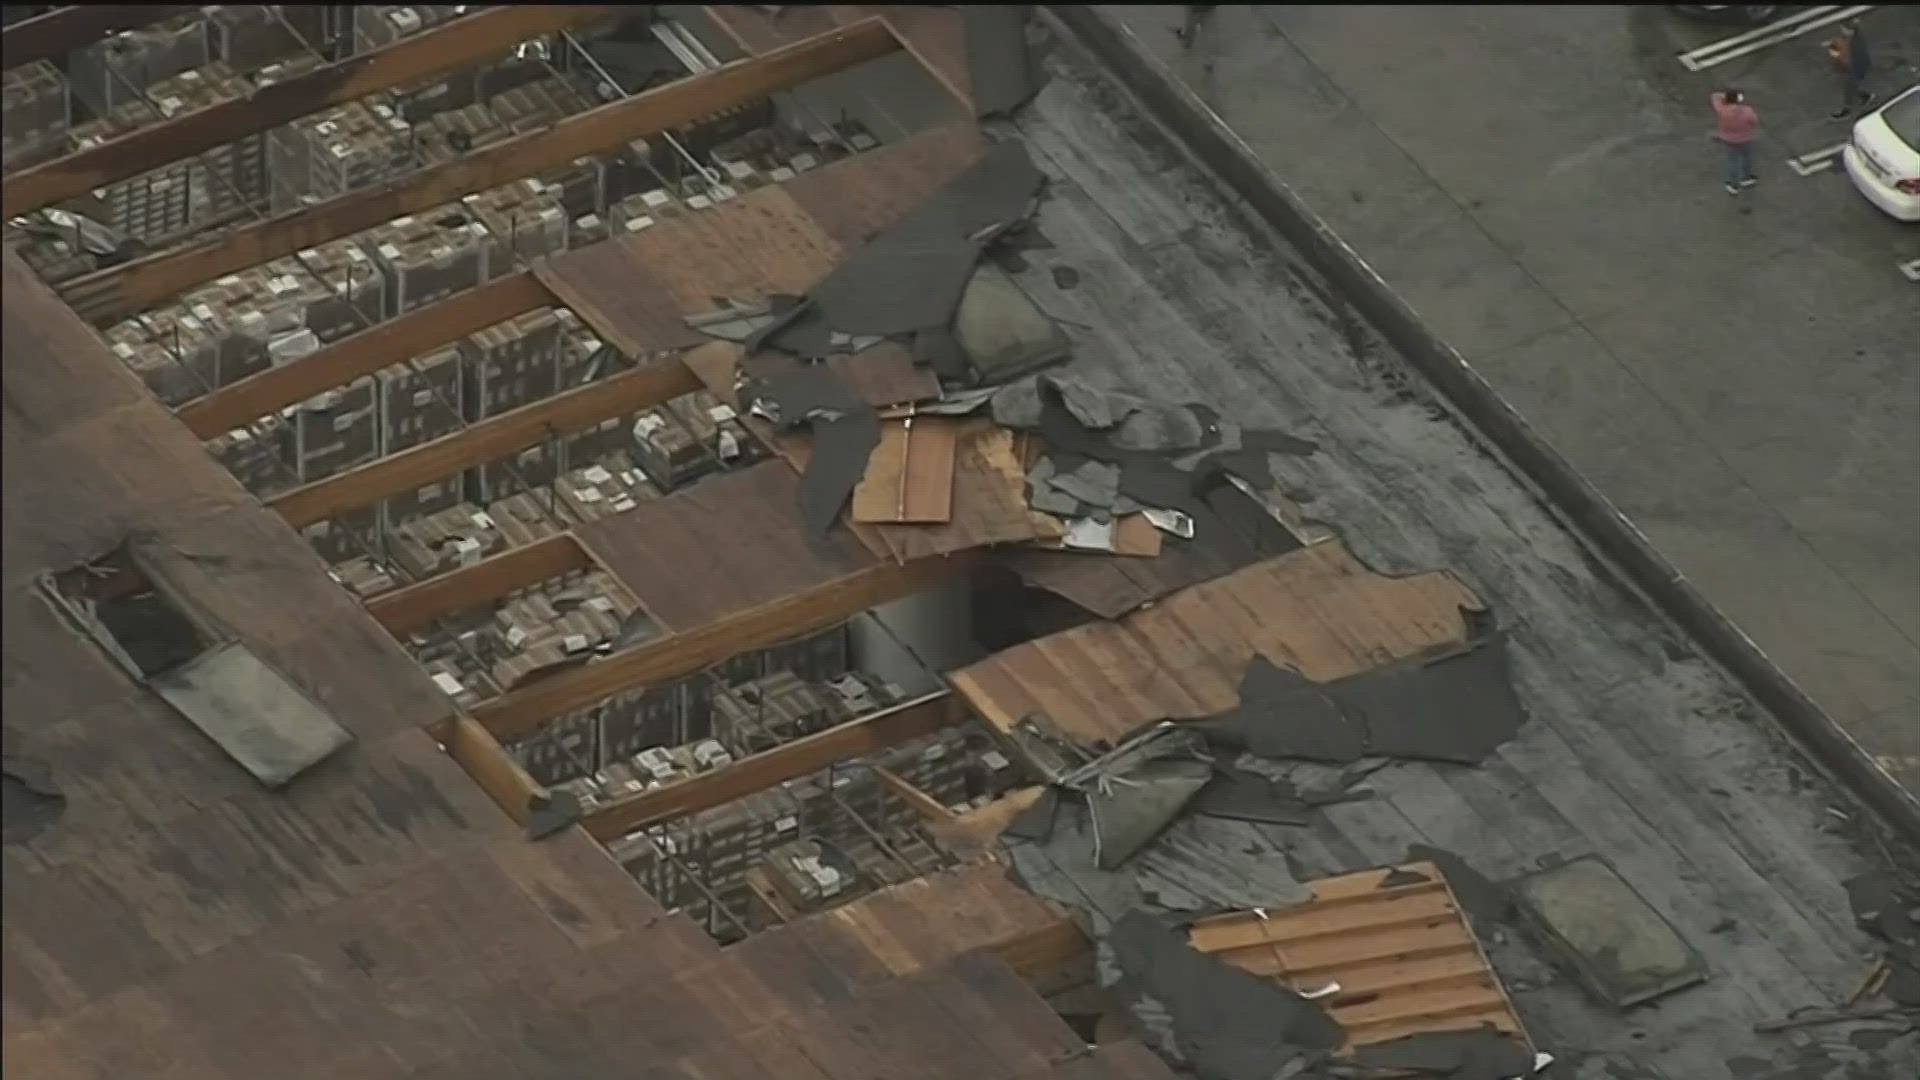 A rare tornado left a line of damage across roofs of commercial buildings in the Los Angeles suburb of Montebello.